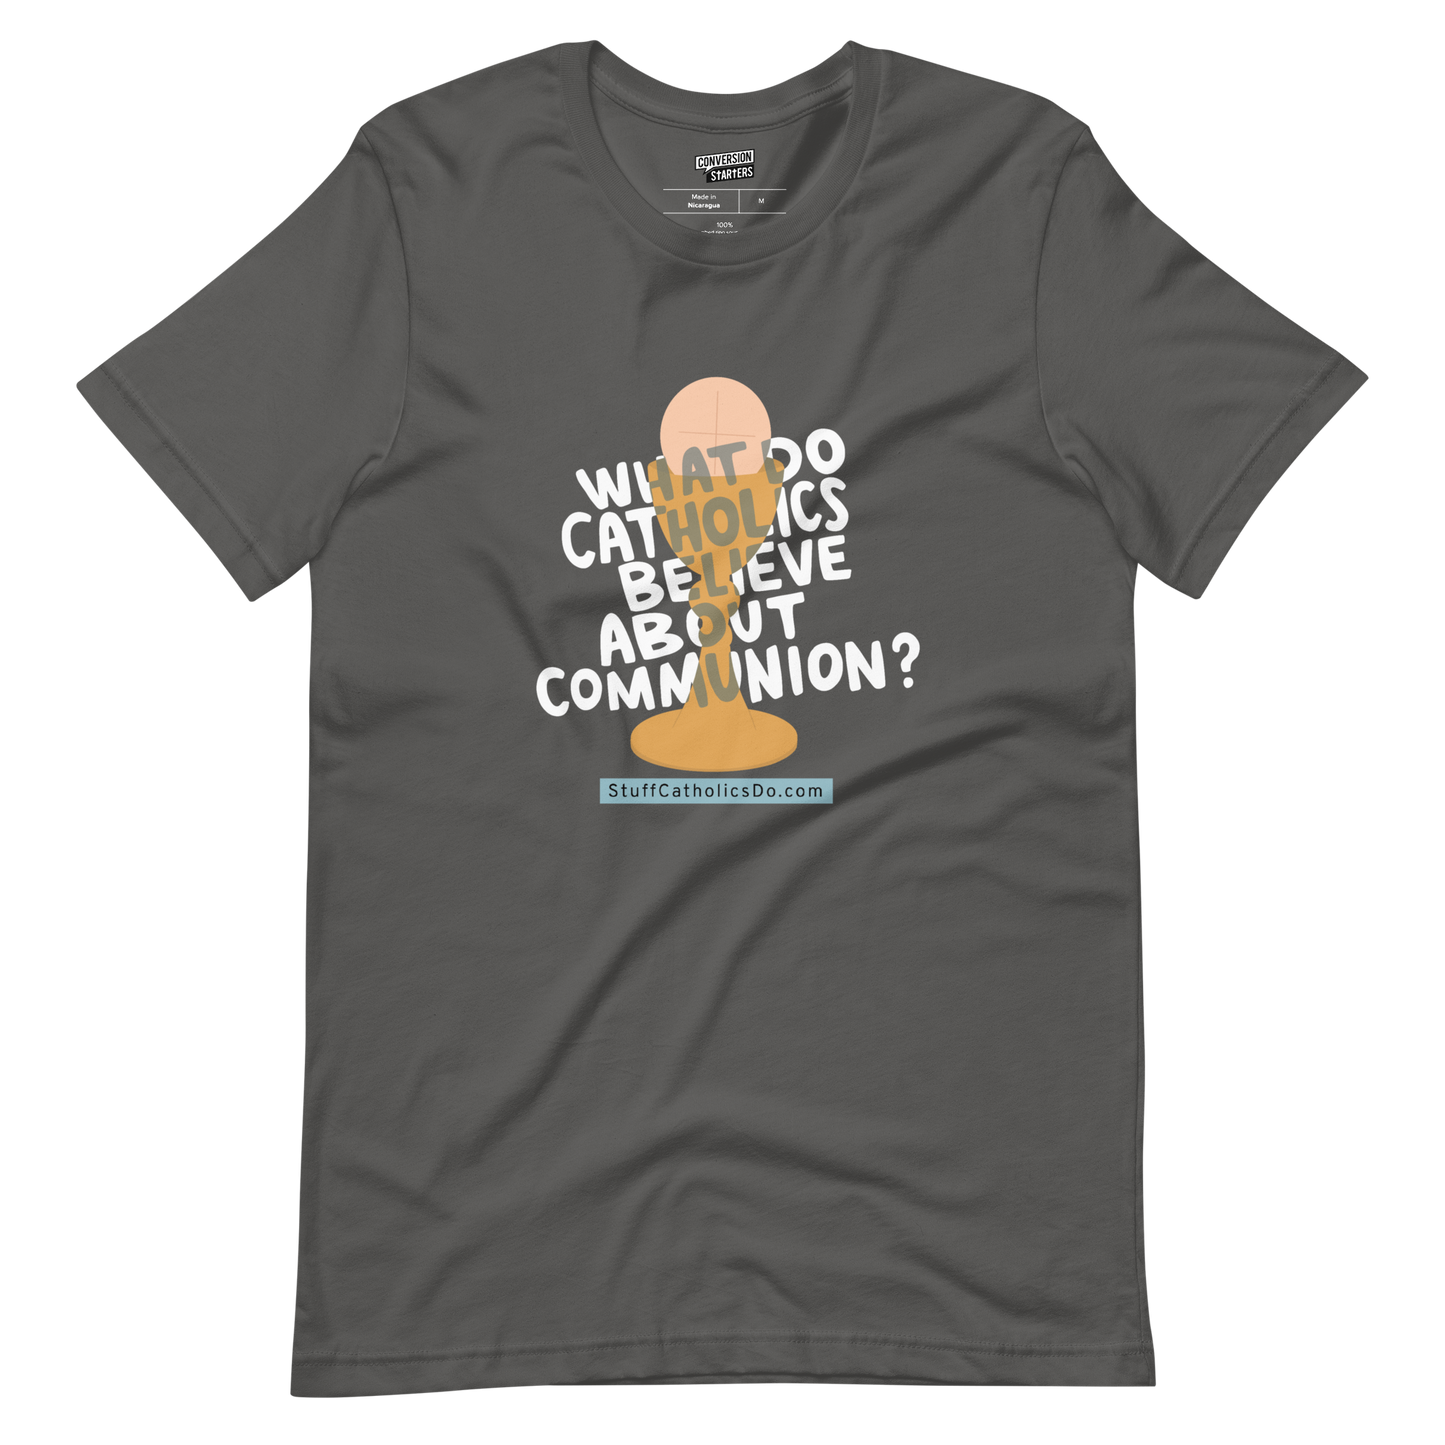 "What Do Catholics Believe About Communion?" T-shirt - Front and Back